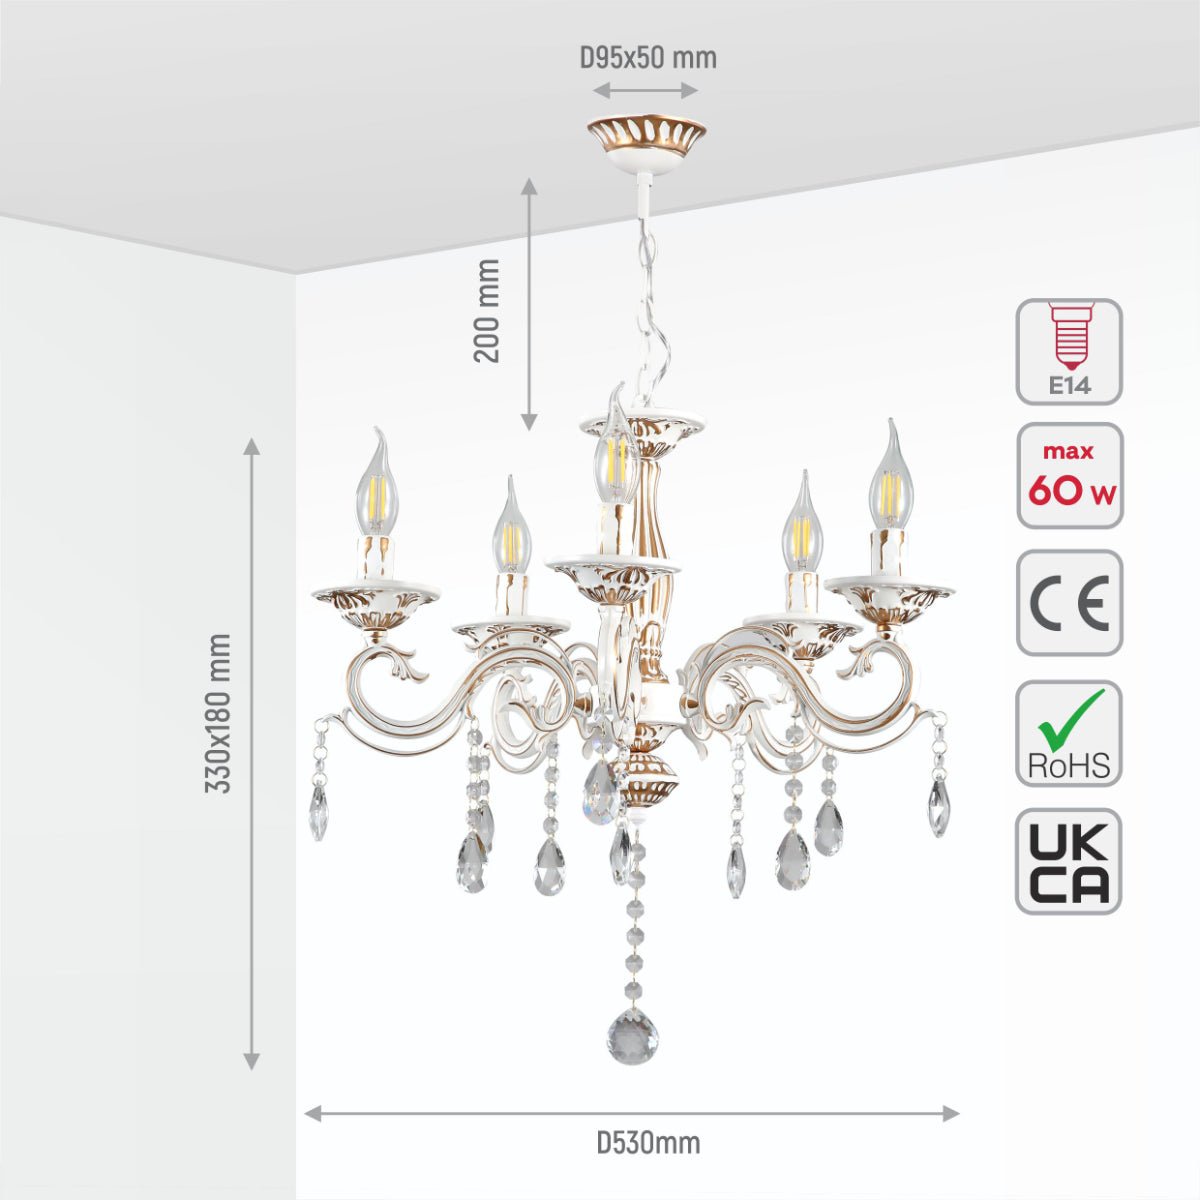 Size and specs of 5 Arm Chandelier Light Ceiling Light Traditional French Vintage Retro Candle Metal and Crystal Gold Aged Cream 5xE14 | TEKLED 159-17830